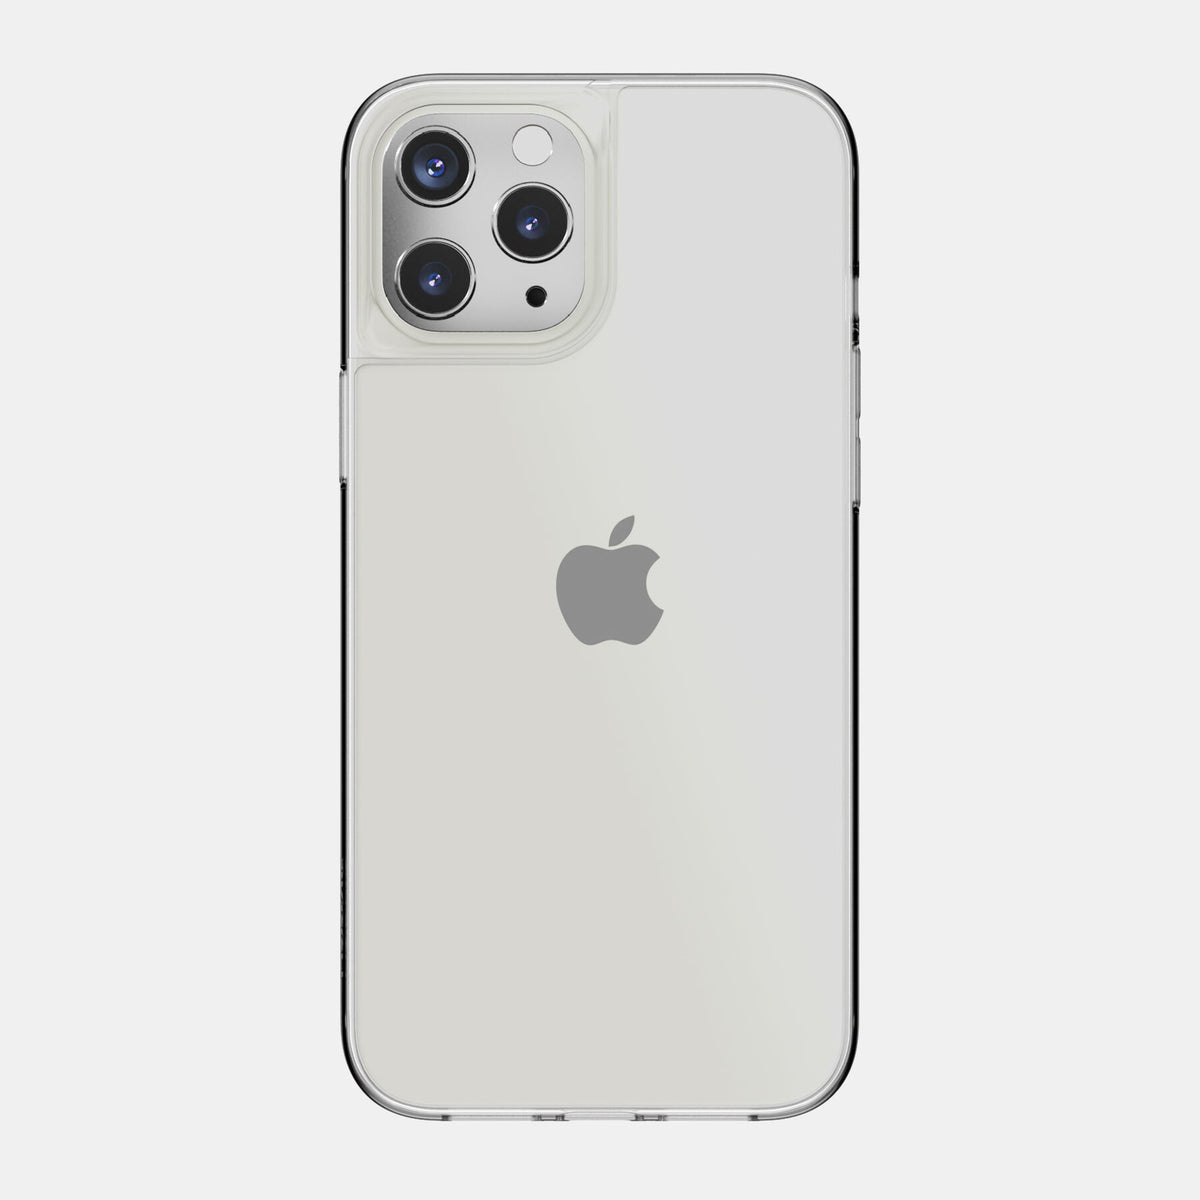 Skech Protection 360 for iPhone 12 / iPhone 12 Pro in Transparent